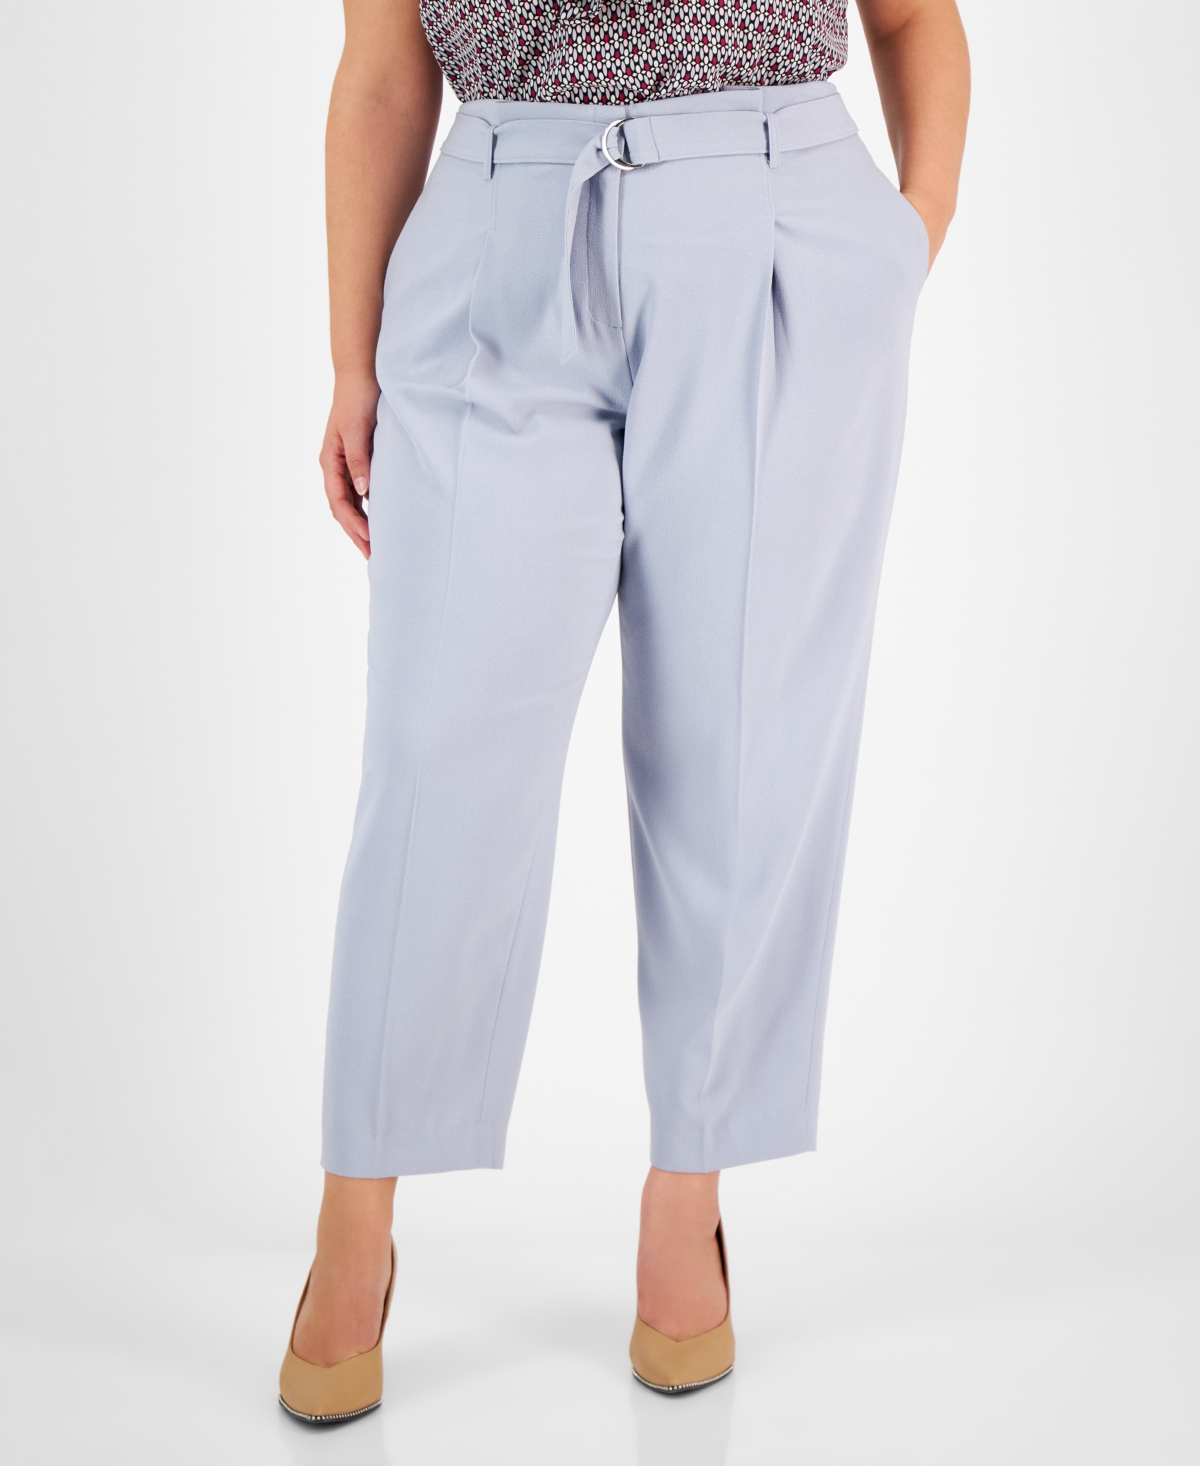  Bar Iii Plus Size Belted Textured Crepe Pants